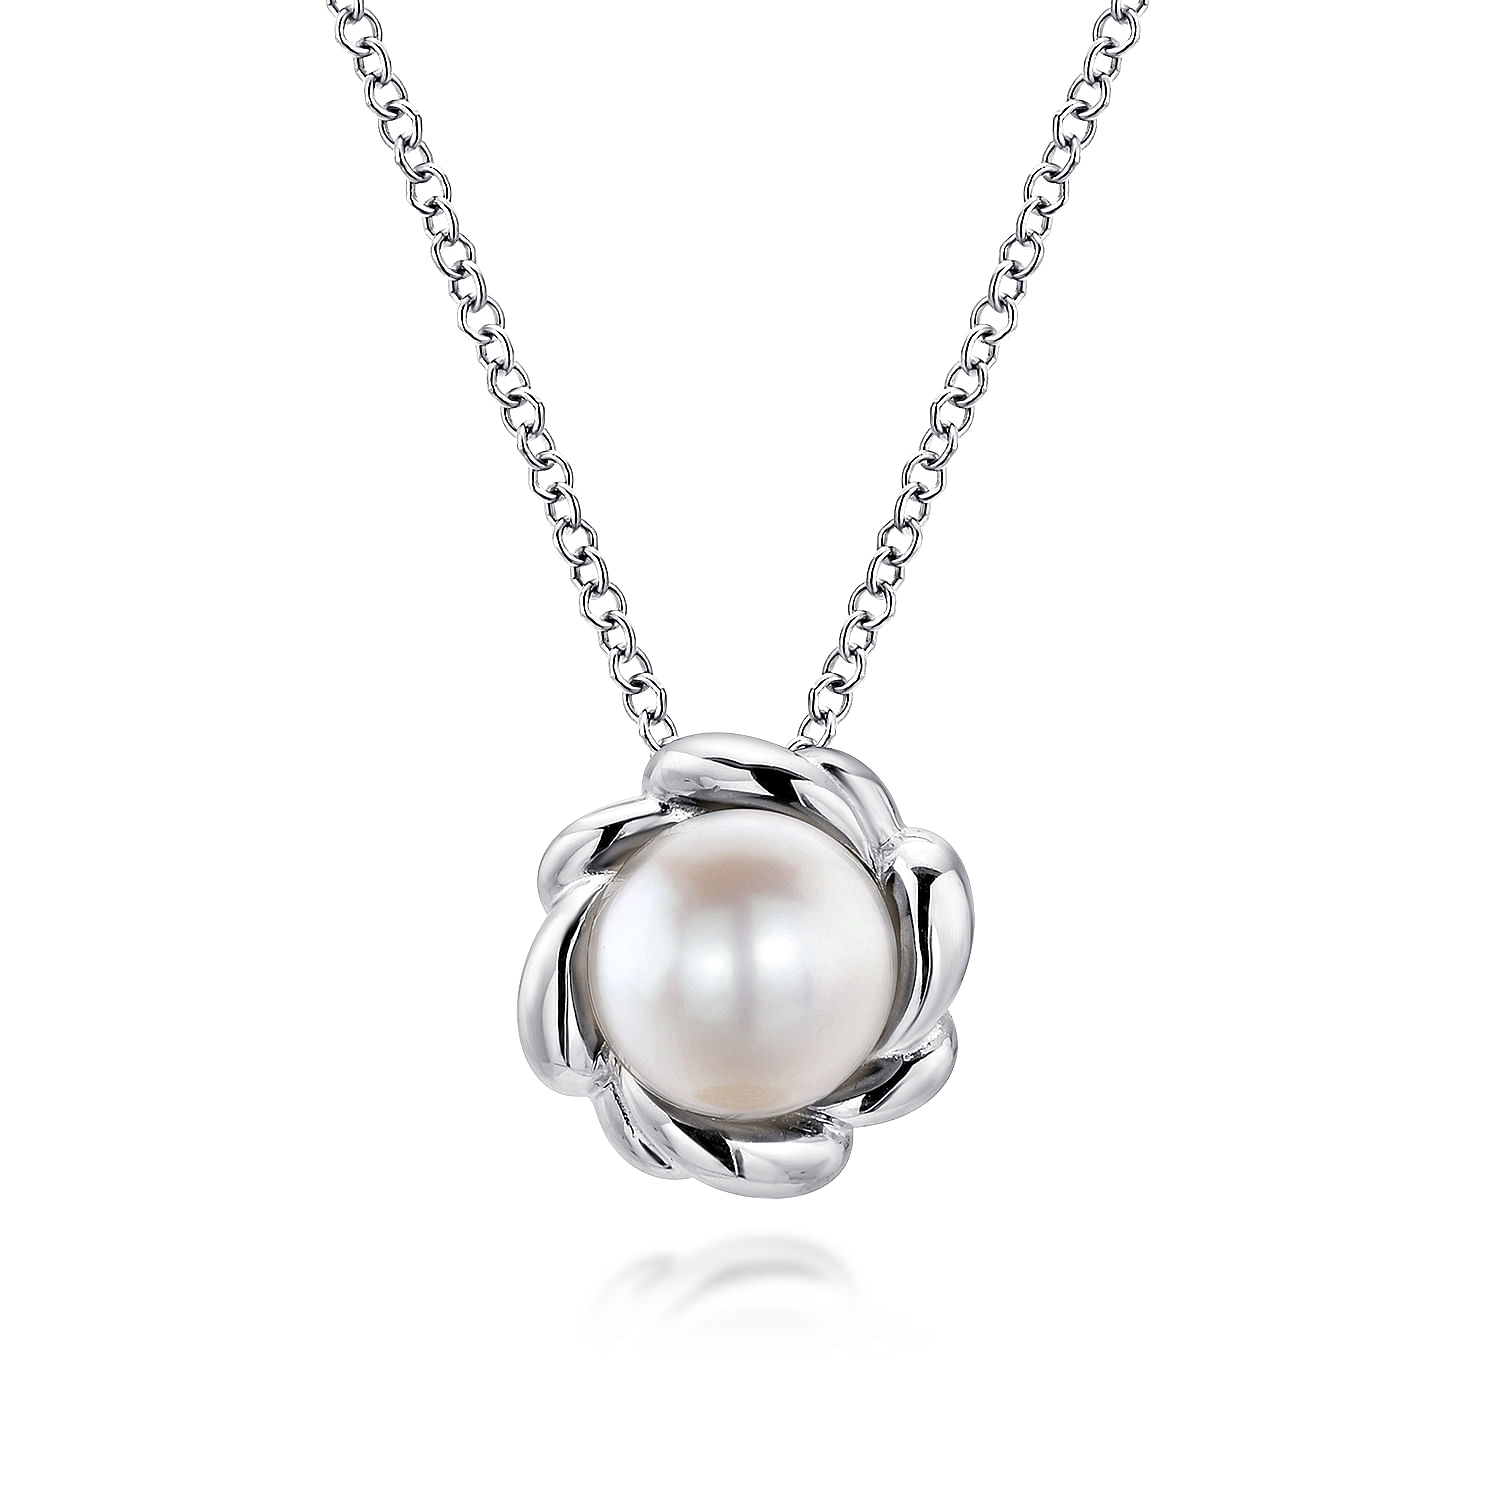 925 Sterling Silver Swirling Cultured Pearl Pendant Necklace